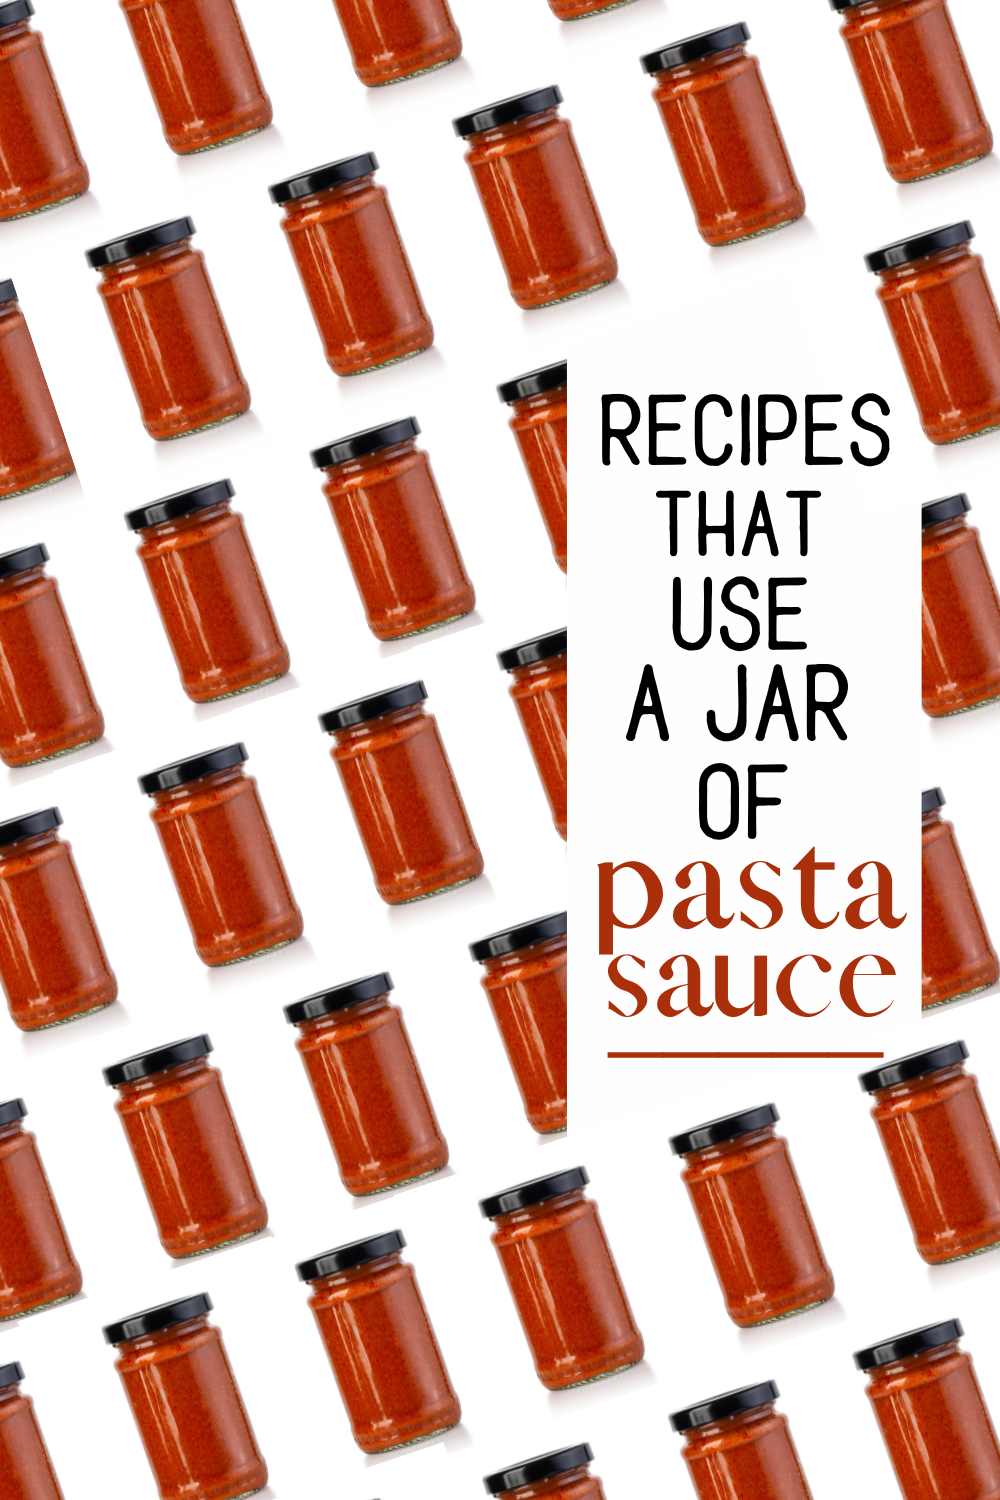 17 Recipes That Use a Jar of Pasta Sauce